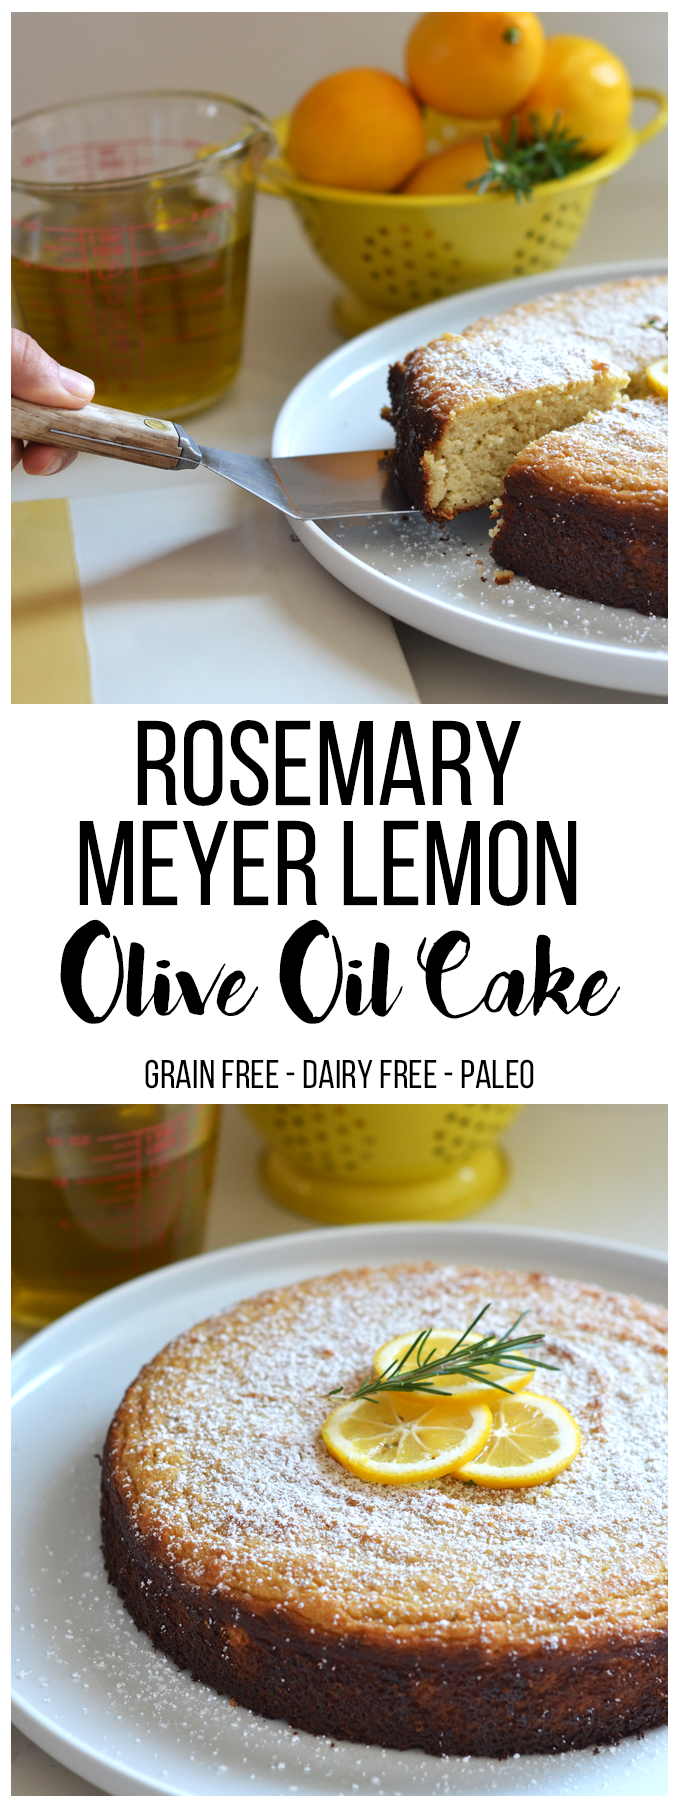 This Rosemary Meyer Lemon Olive Oil Cake is Grain free, refined sugar free and dairy free aka - Paleo! It has such fabulous flavor and is perfect for any party or brunch!